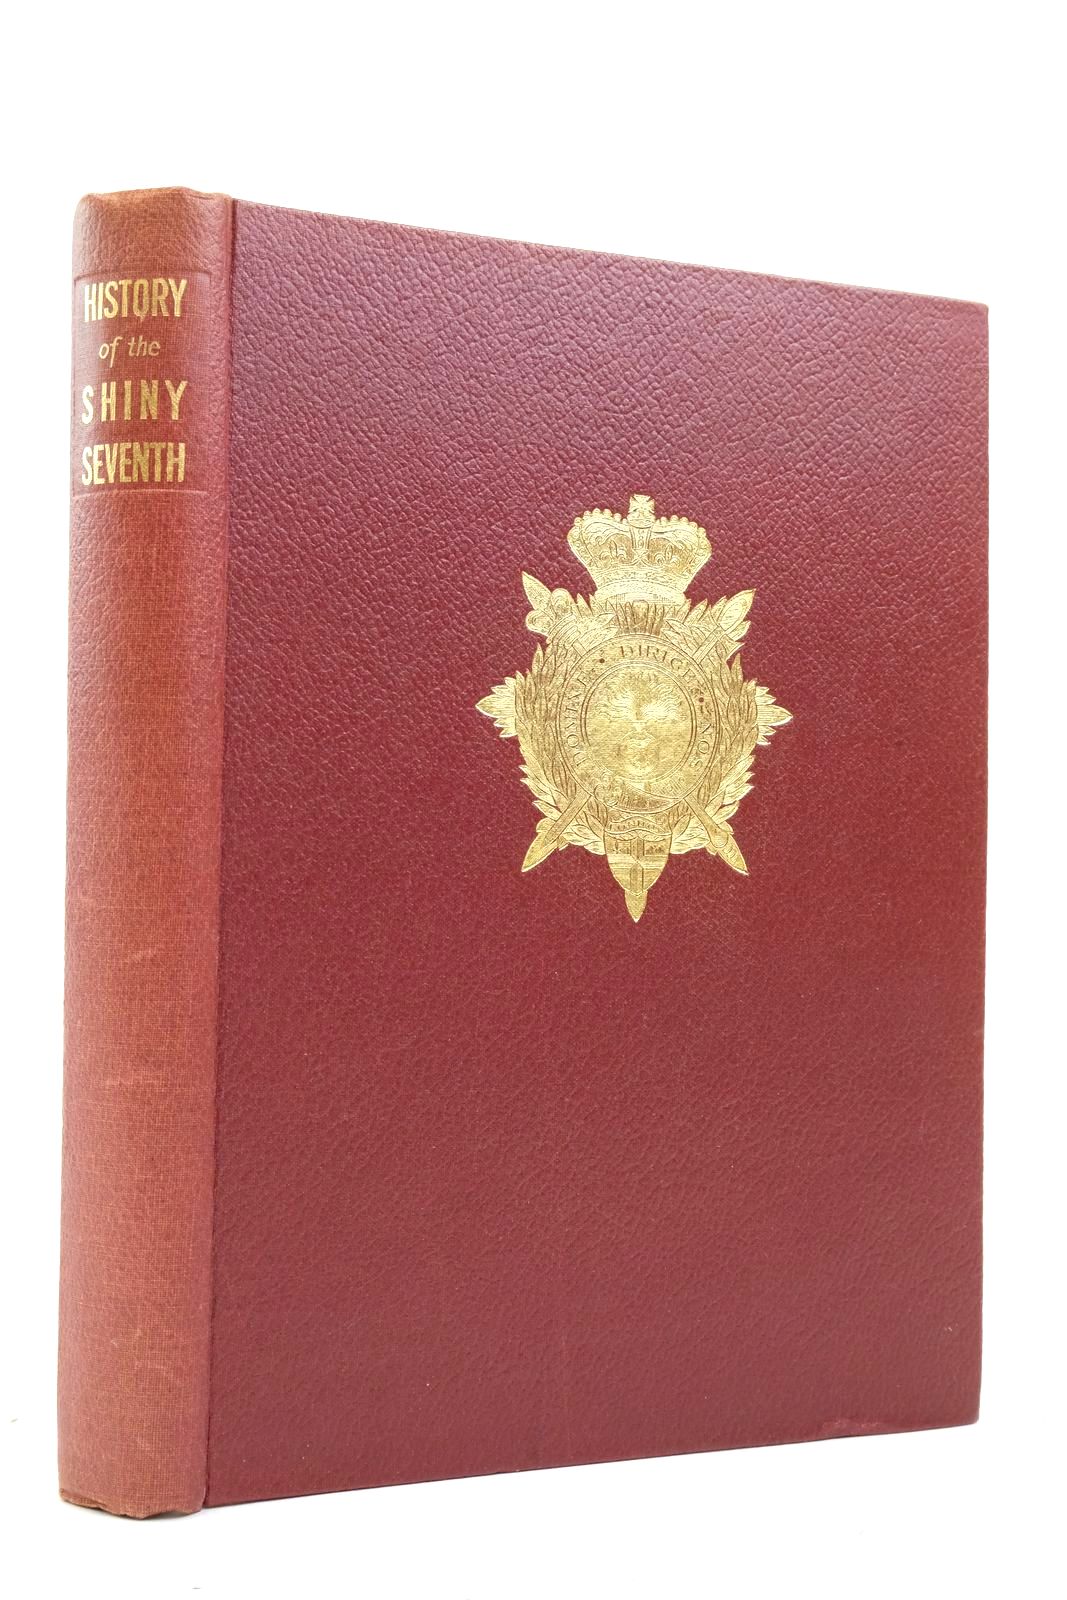 Photo of HISTORY OF THE 7TH (CITY OF LONDON) BATTALION THE LONDON REGIMENT written by Planck, C. Digby published by Old Comrades Association (STOCK CODE: 2137544)  for sale by Stella & Rose's Books